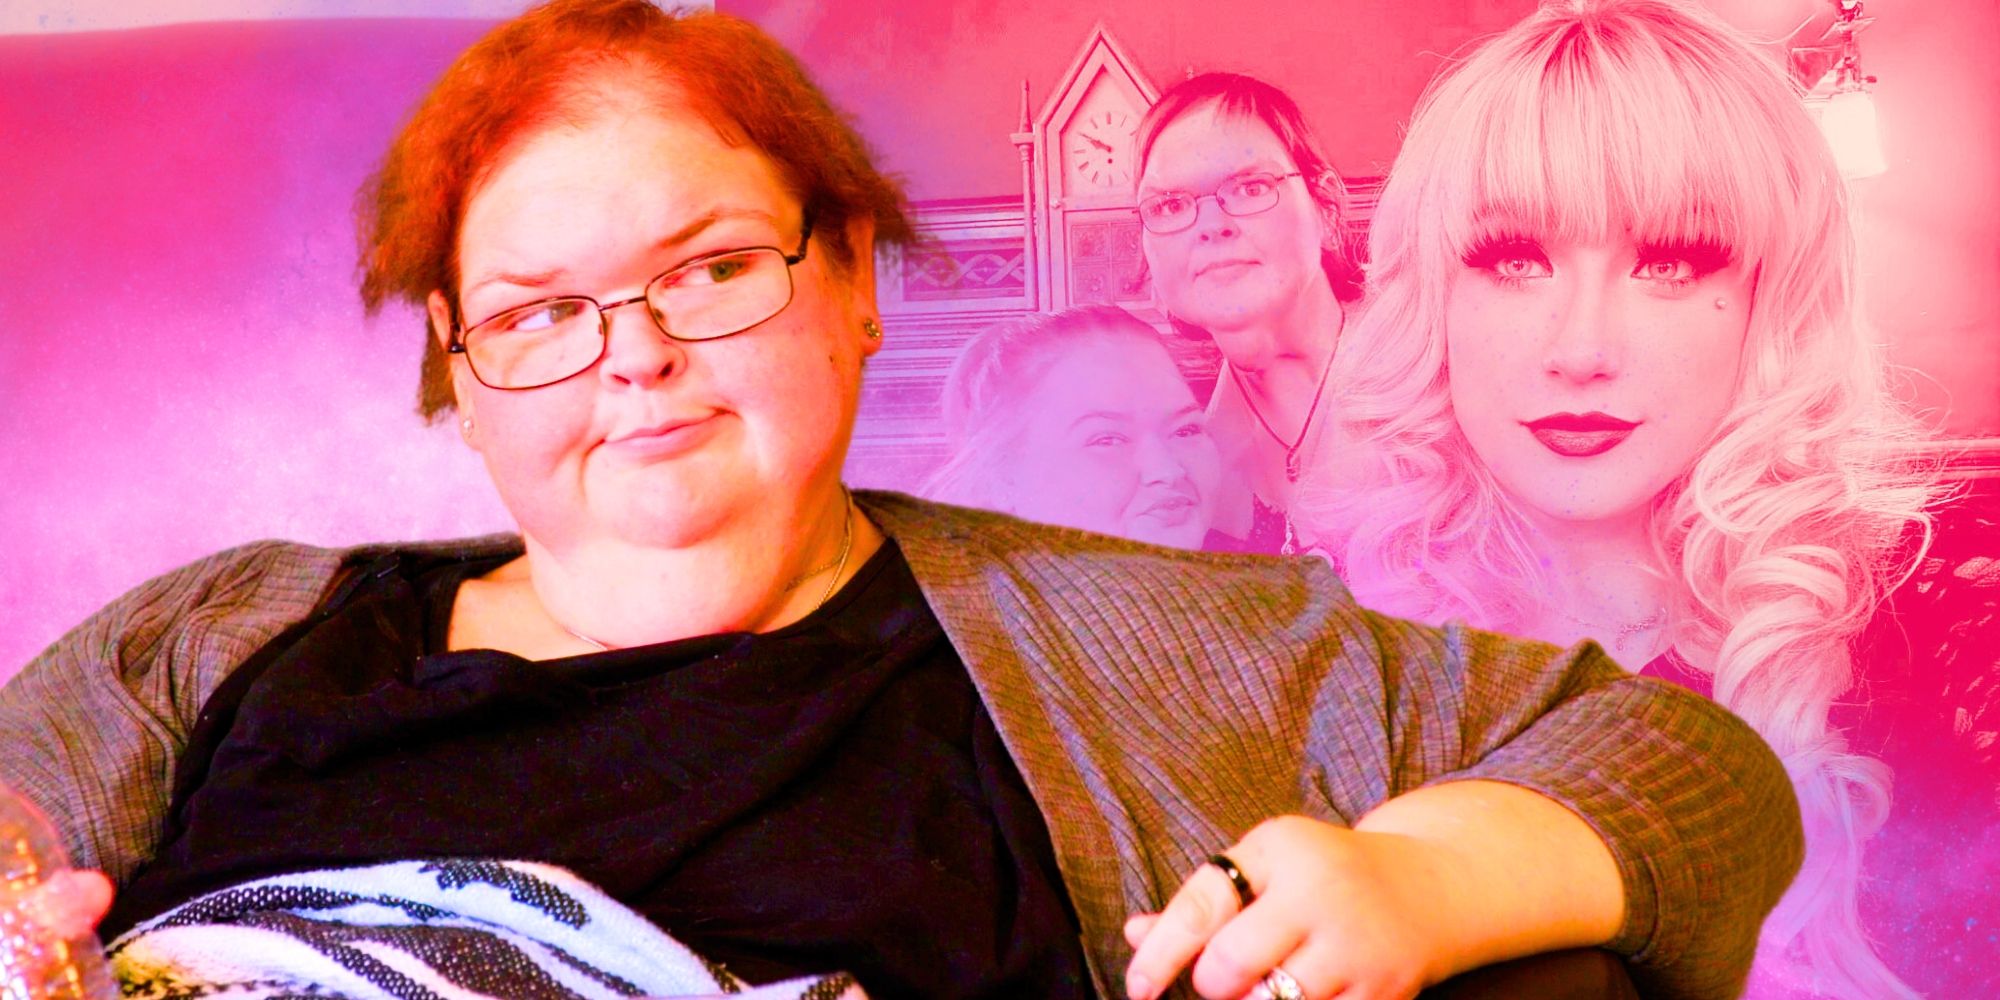 1000-Lb Sisters Tammy Slaton & Friend Haley Michelle Feel So Connected Amid Weight Loss Success